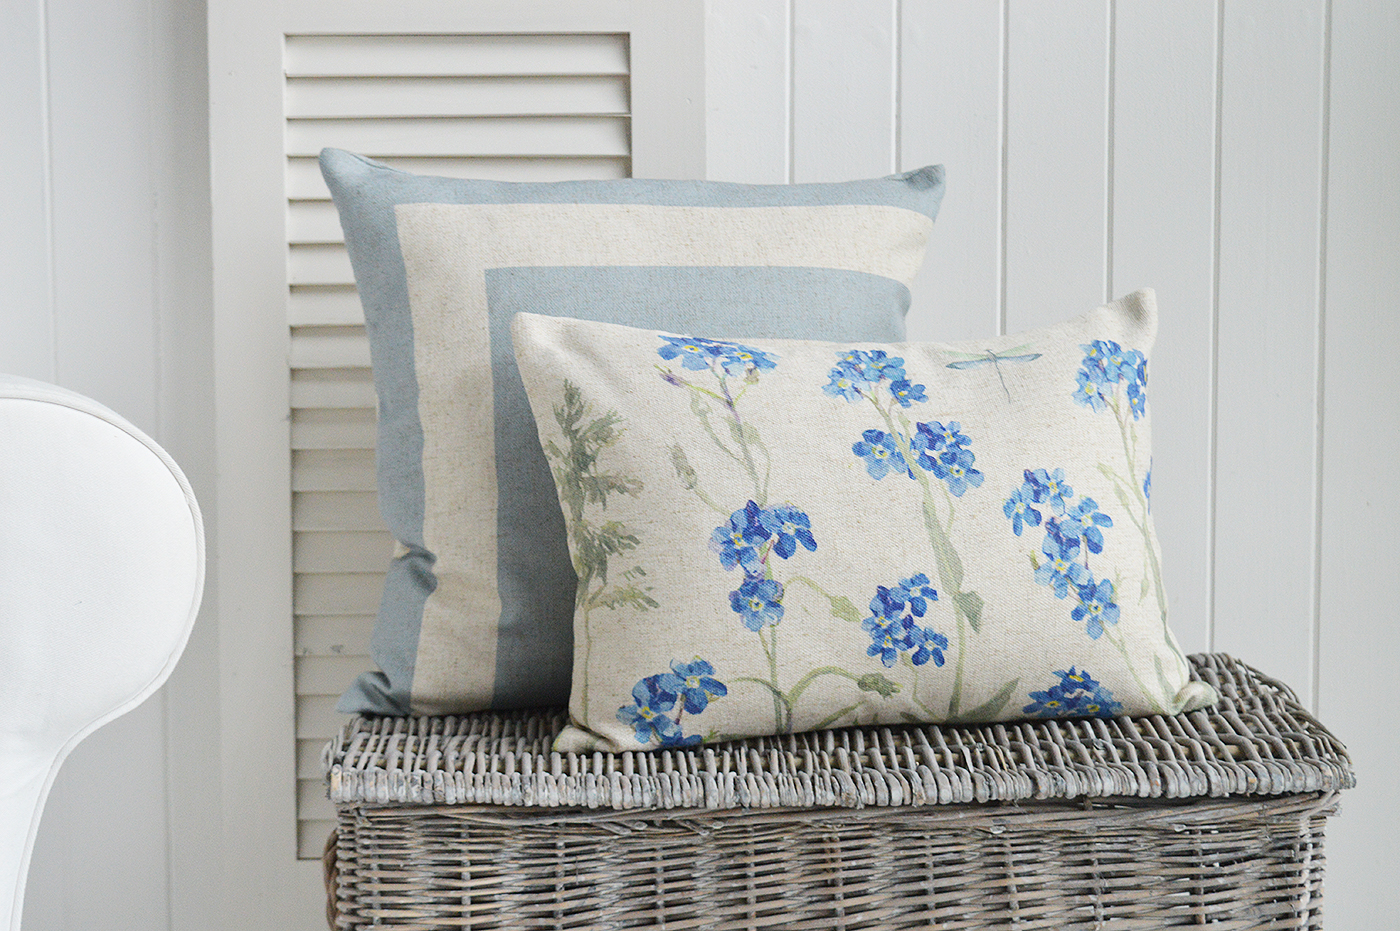 Nantucket floral style cushions for New England  country farmhouse and coastal furniture and interiors